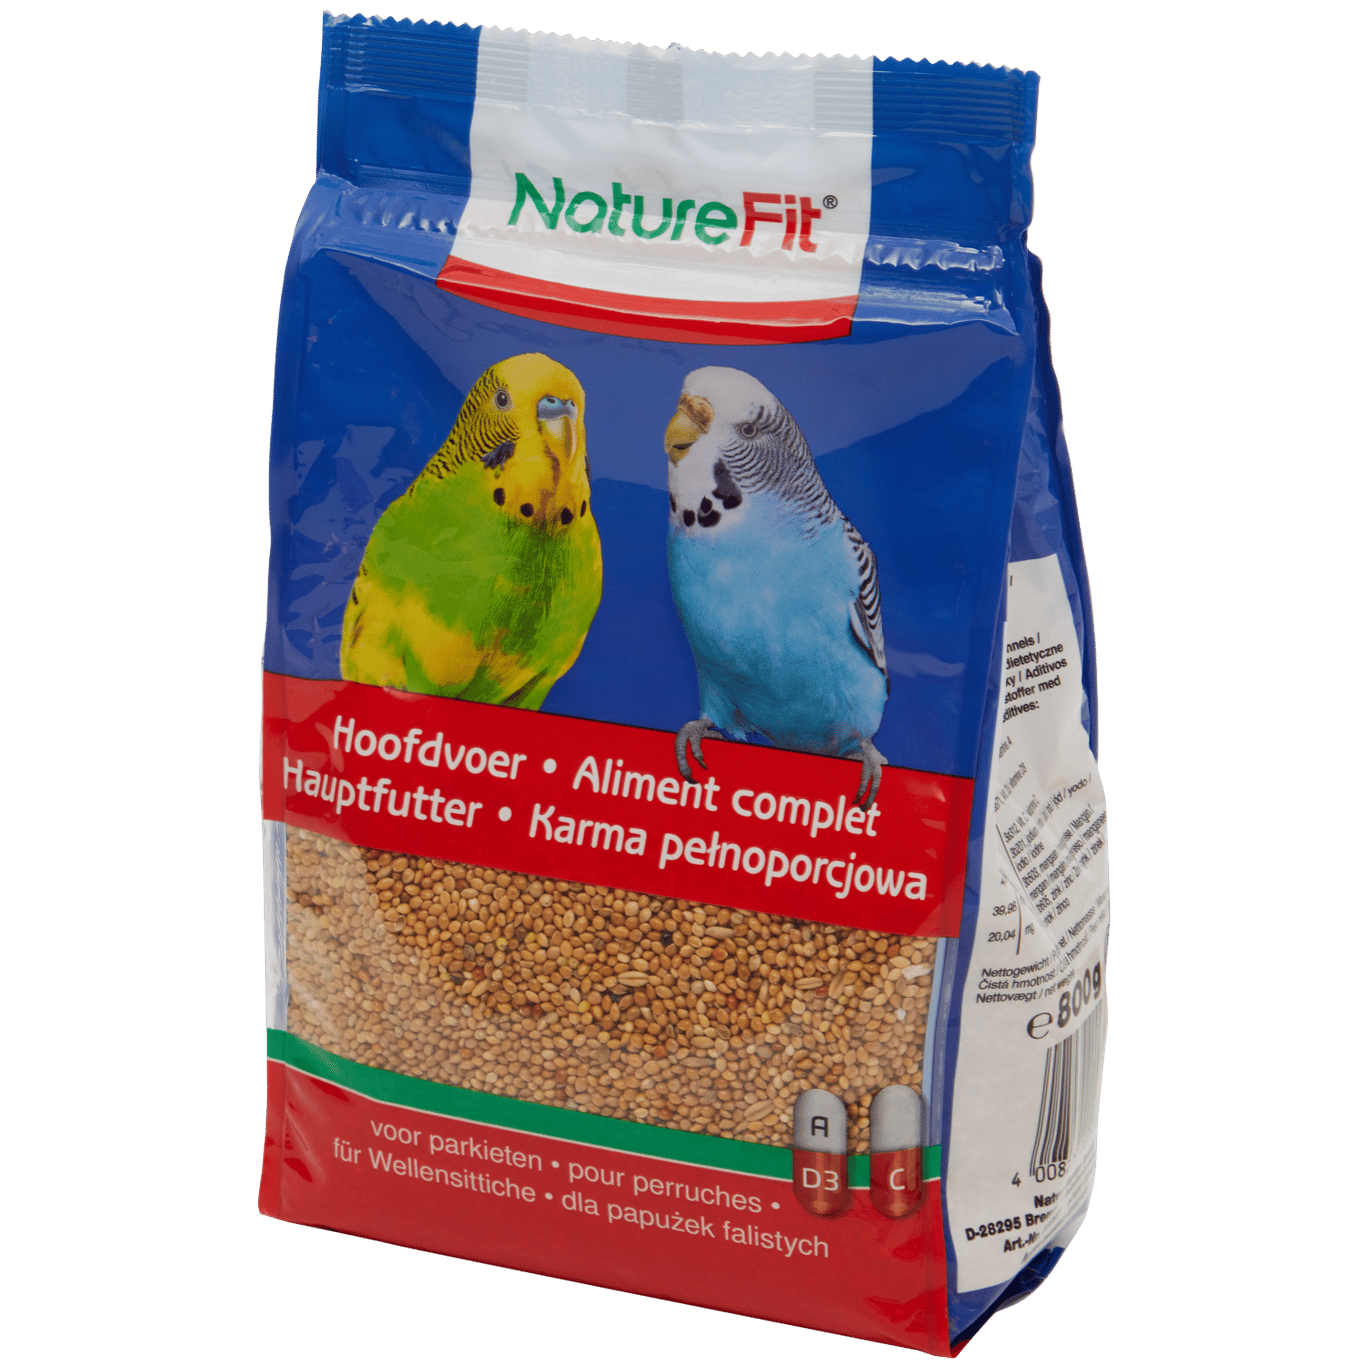 Mangime completo per pappagalli Nature Fit